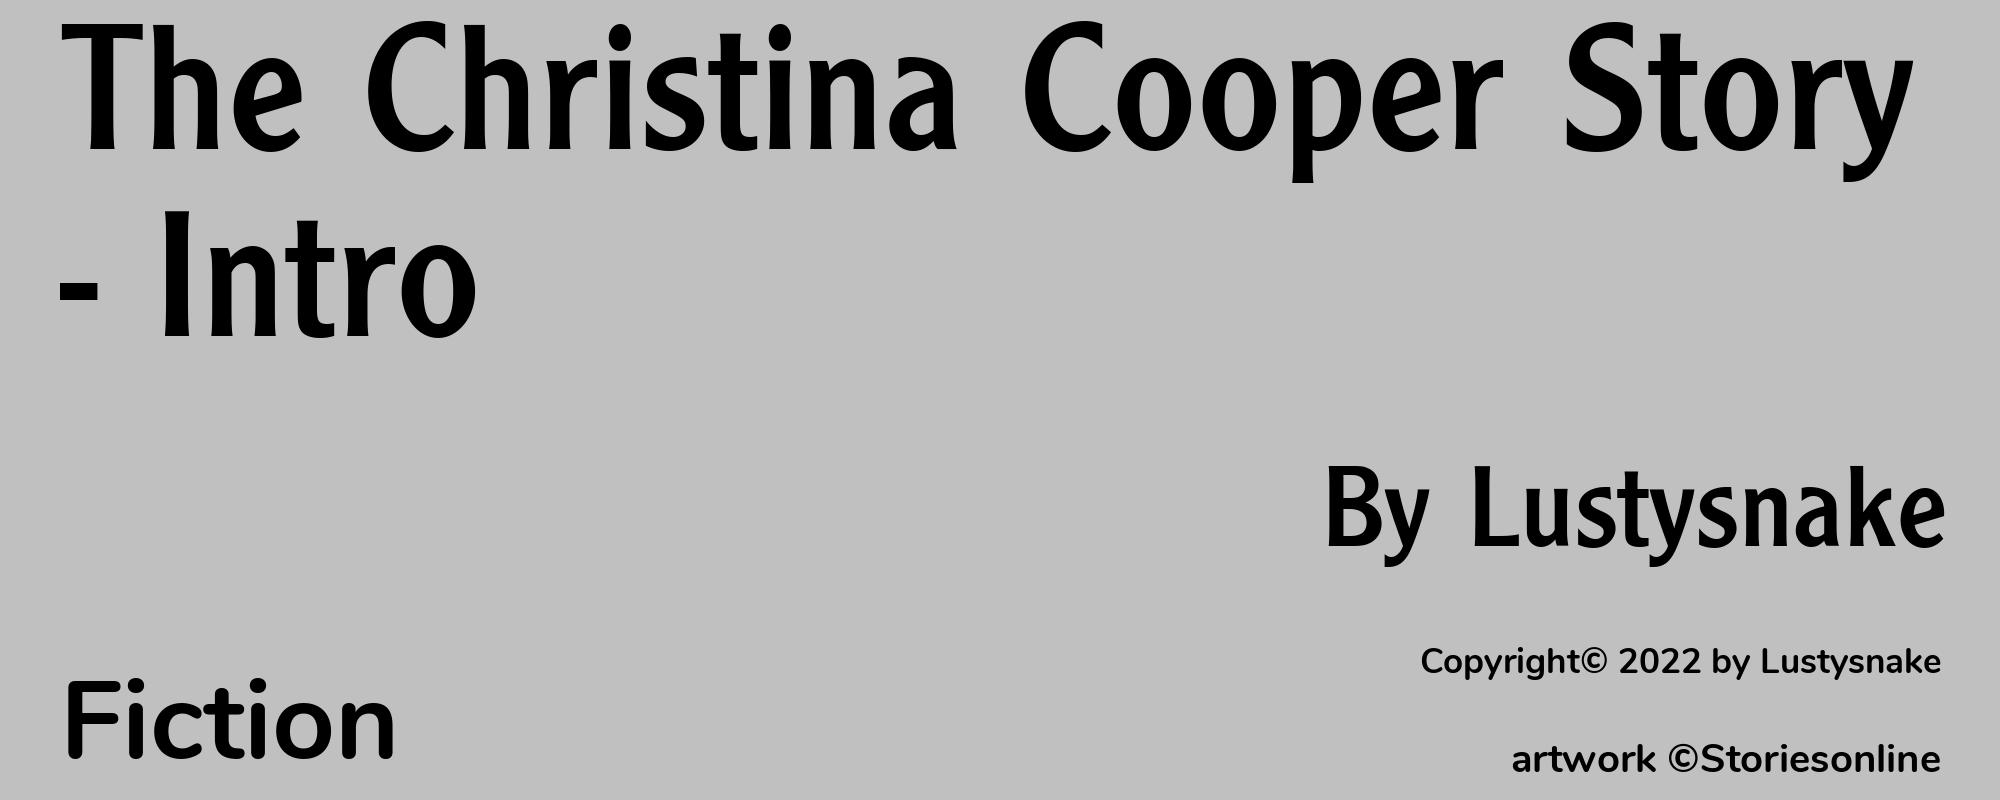 The Christina Cooper Story - Intro - Cover